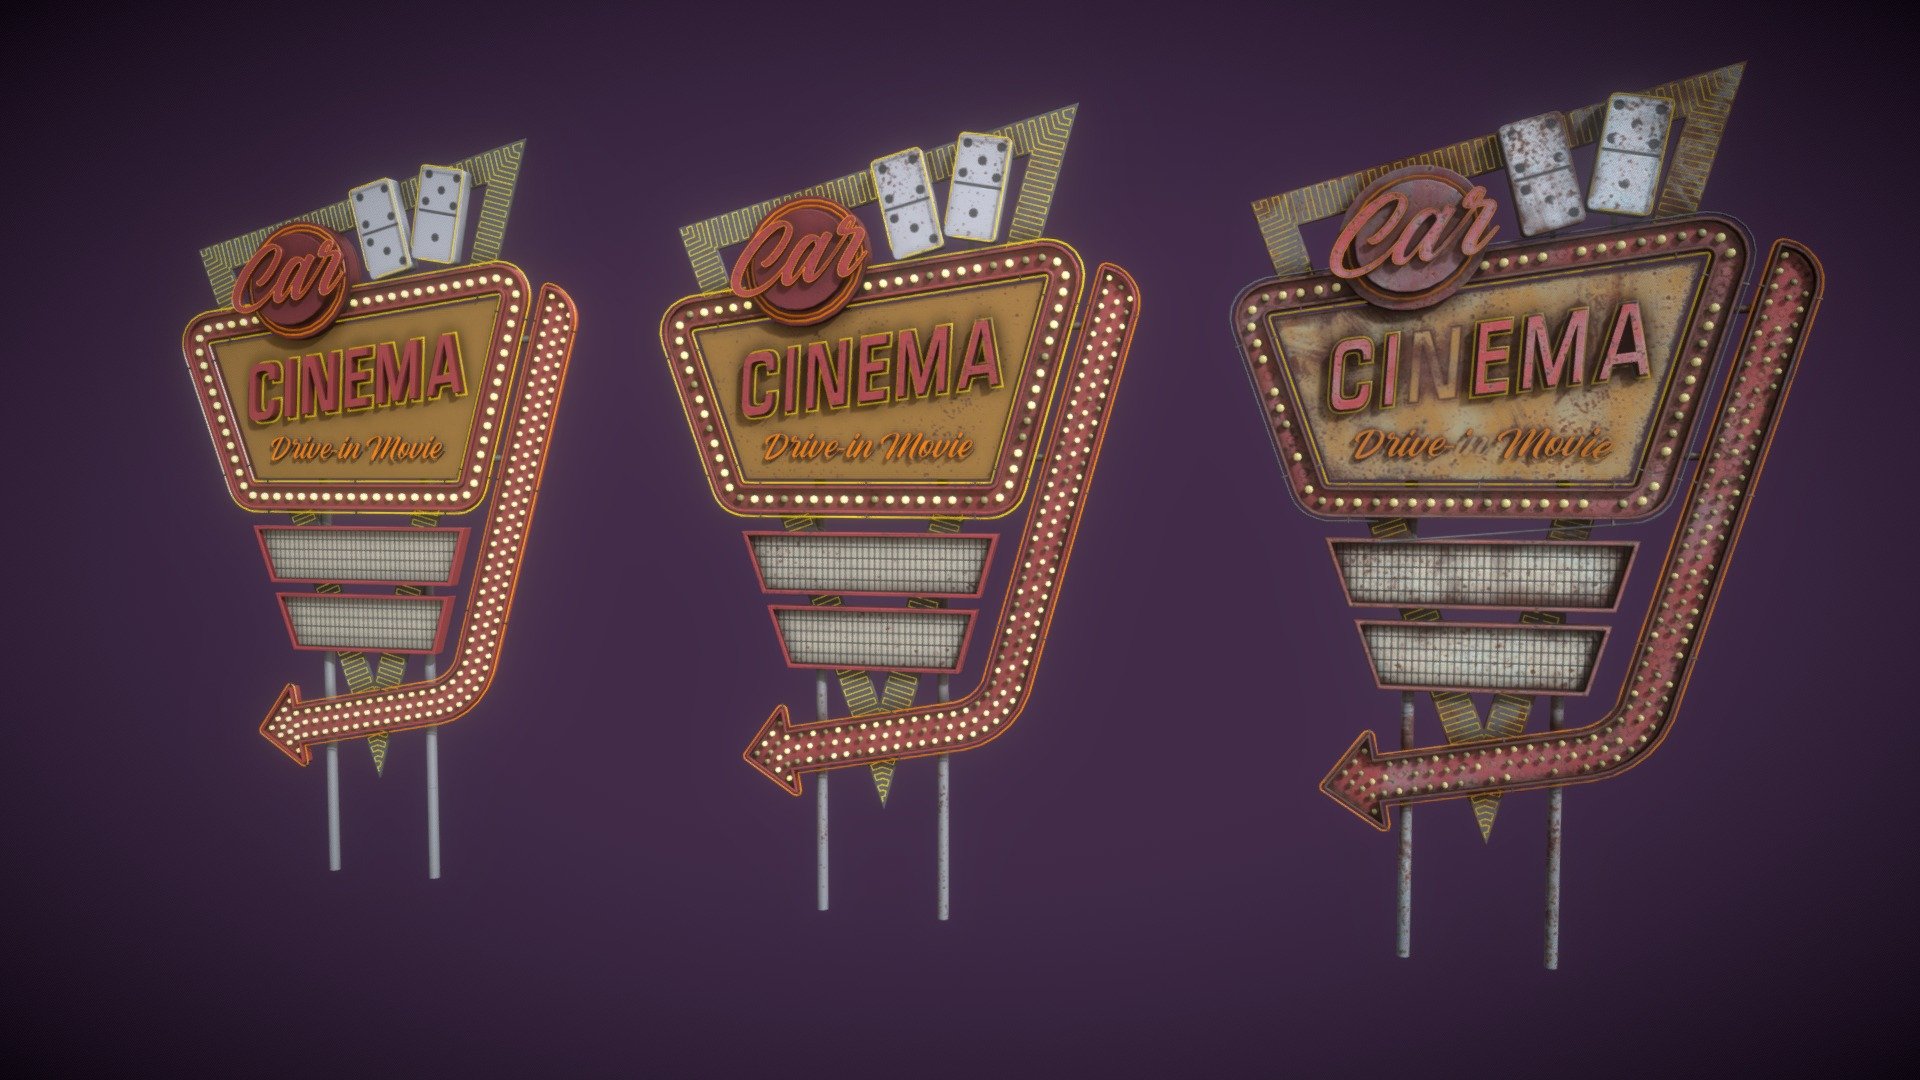 Render: https://www.artstation.com/artwork/WBYd33

This is a neon billboard of a car cinema, made in the style of the 60s and 70s, in 3 versions: whole (new), slightly rusty and old. This model contains 3 packs of PBR textures (1 pack of textures for each state).

Cinema_signs_all_ao.png - The ambient occlusion texture is only one and is used in all versions.

Pack 1:

Cinema_signs_all_ao.png

Cinema_signs_01_Basecolor.jpg

Cinema_signs_01_Emission.png

Cinema_signs_01_Metallic.png

Cinema_signs_01_Normal.png

Cinema_signs_01_Roughness.png

Pack 2:

Cinema_signs_all_ao.png

Cinema_signs_02_BaseColor.jpg

Cinema_signs_02_Emission.png

Cinema_signs_02_Metallic.jpg

Cinema_signs_02_Normal.png

Cinema_signs_02_Roughness.jpg

Pack 3:

Cinema_signs_all_ao.png

Cinema_signs_03_BaseColor.jpg

Cinema_signs_03_Emission.png

Cinema_signs_03_Metallic.jpg

Cinema_signs_03_Normal.png

Cinema_signs_03_Roughness.jpg

Each model contains:
Vertexes: 12.501
Triangles: 19.539 - Car Cinema Billboard in 3 versions (signs) - Buy Royalty Free 3D model by Black vizual (@Black_vizual) 3d model